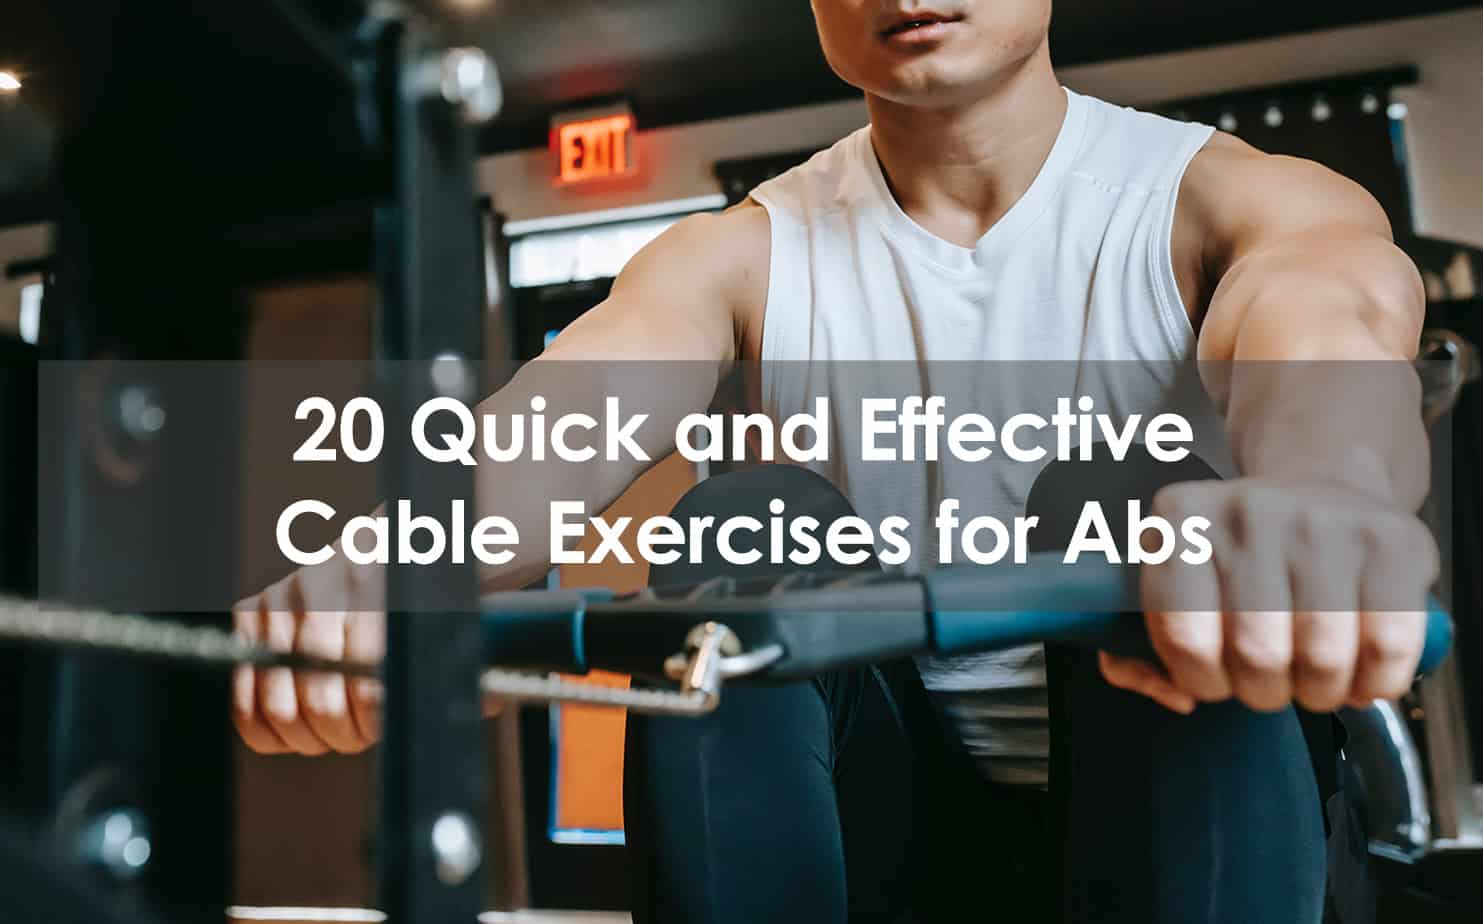 Amplificador Banquete recluta 20 Quick And Effective Cable Exercises For Abs